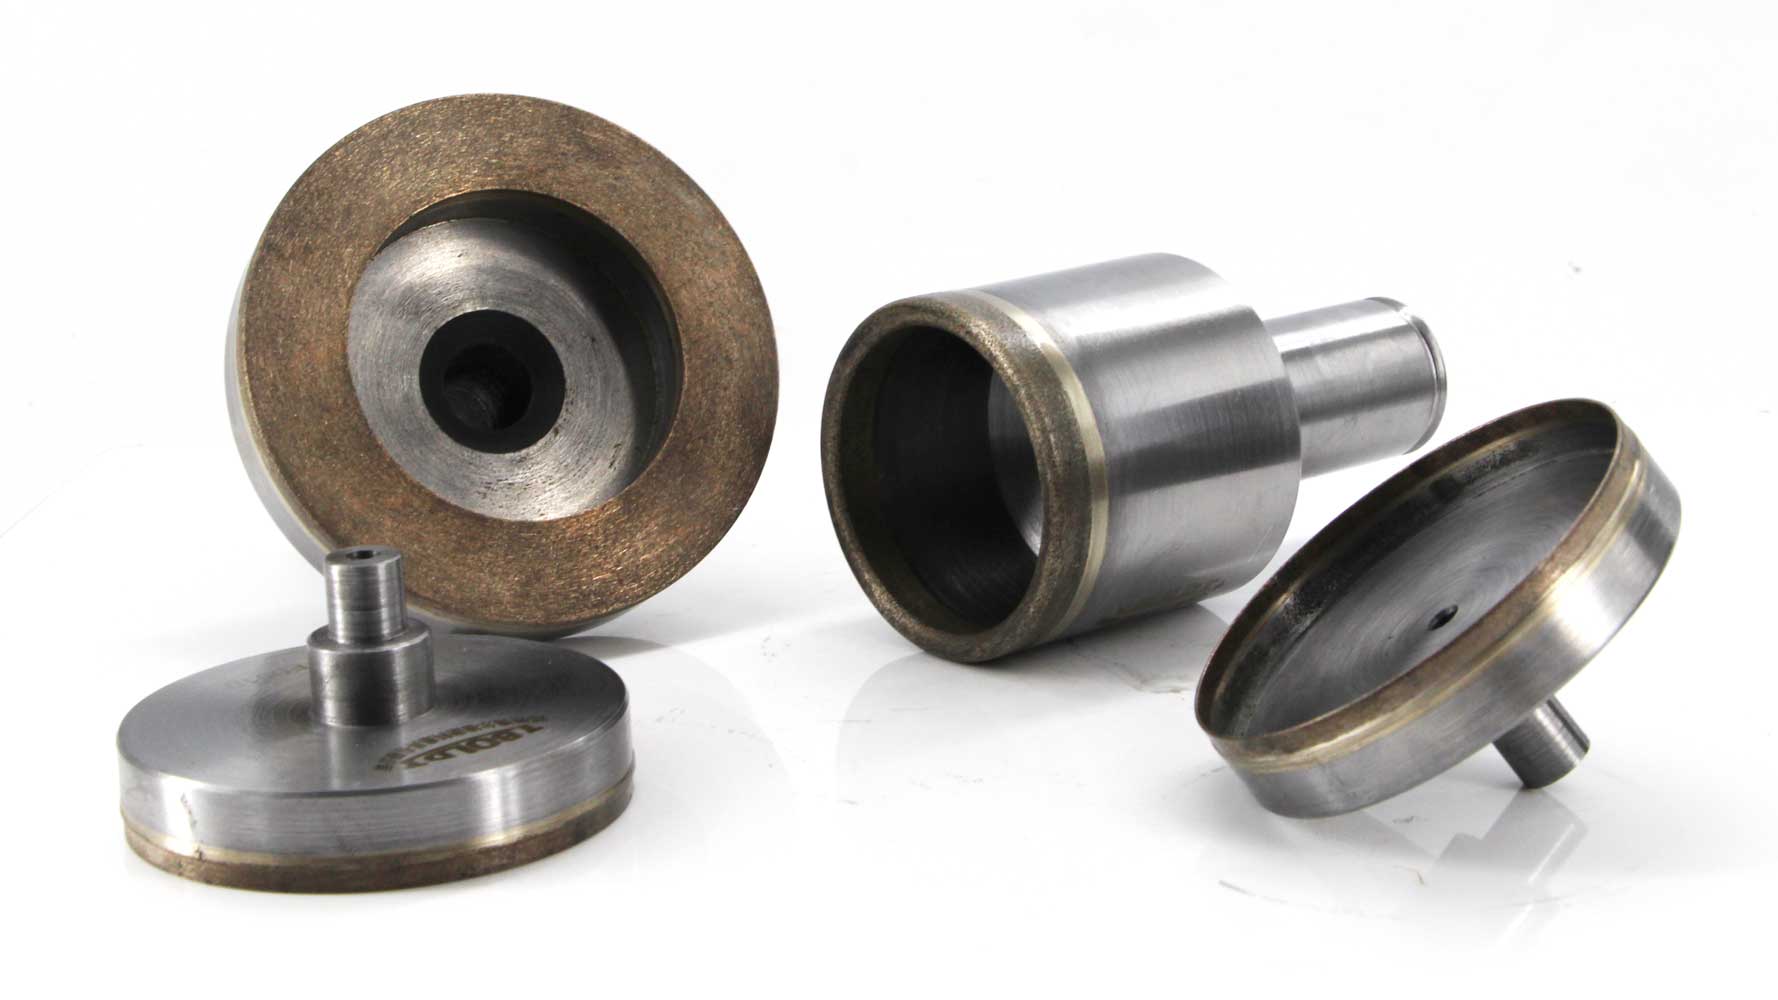 How to select grinding wheels